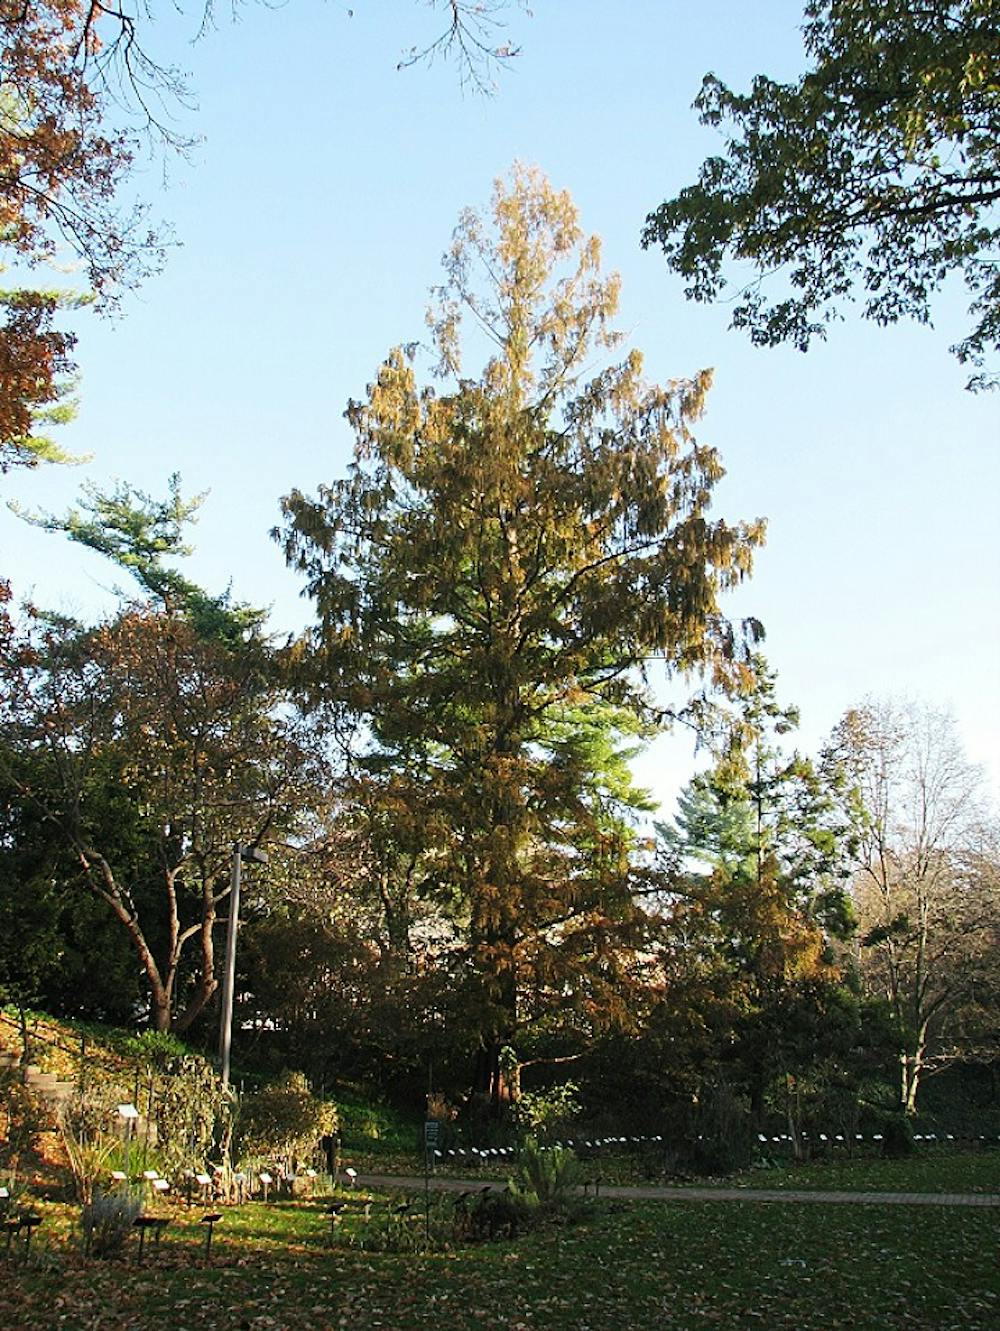 Pictured is the historical Dawn redwood tree on Nov. 14, 2017 at Beal Botanical Garden. The tree was planted in 1954 and was trimmed more than 20 feet to preserve it and protect it from being damaged by future storms. Photo courtesy of Frank Telewski.